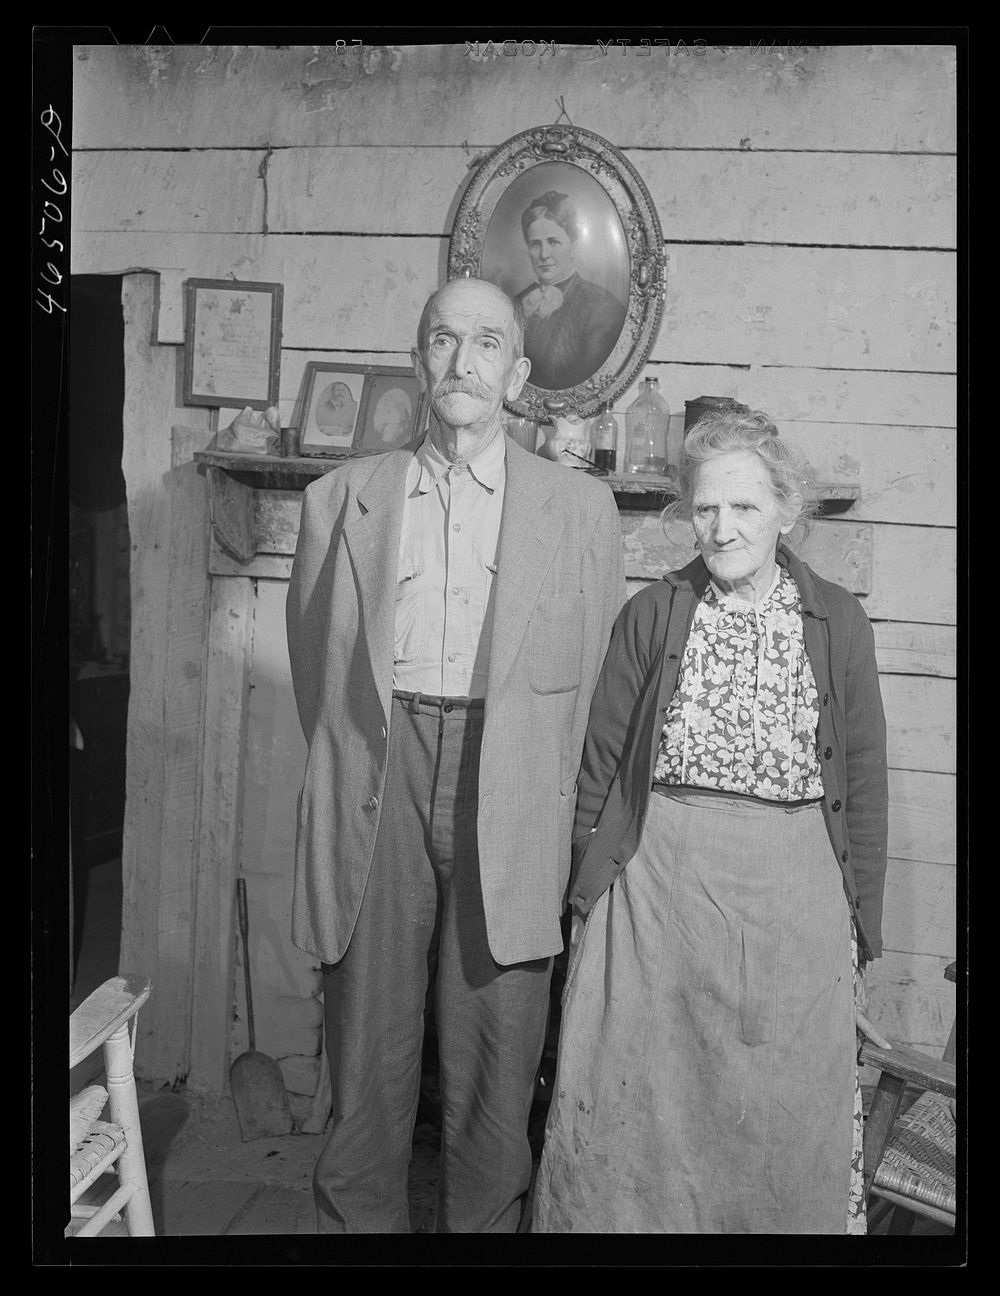 Mr. and Mrs. Arthur Bertland, old age pensioners in Penfield, Greene County, Georgia. Sourced from the Library of Congress.